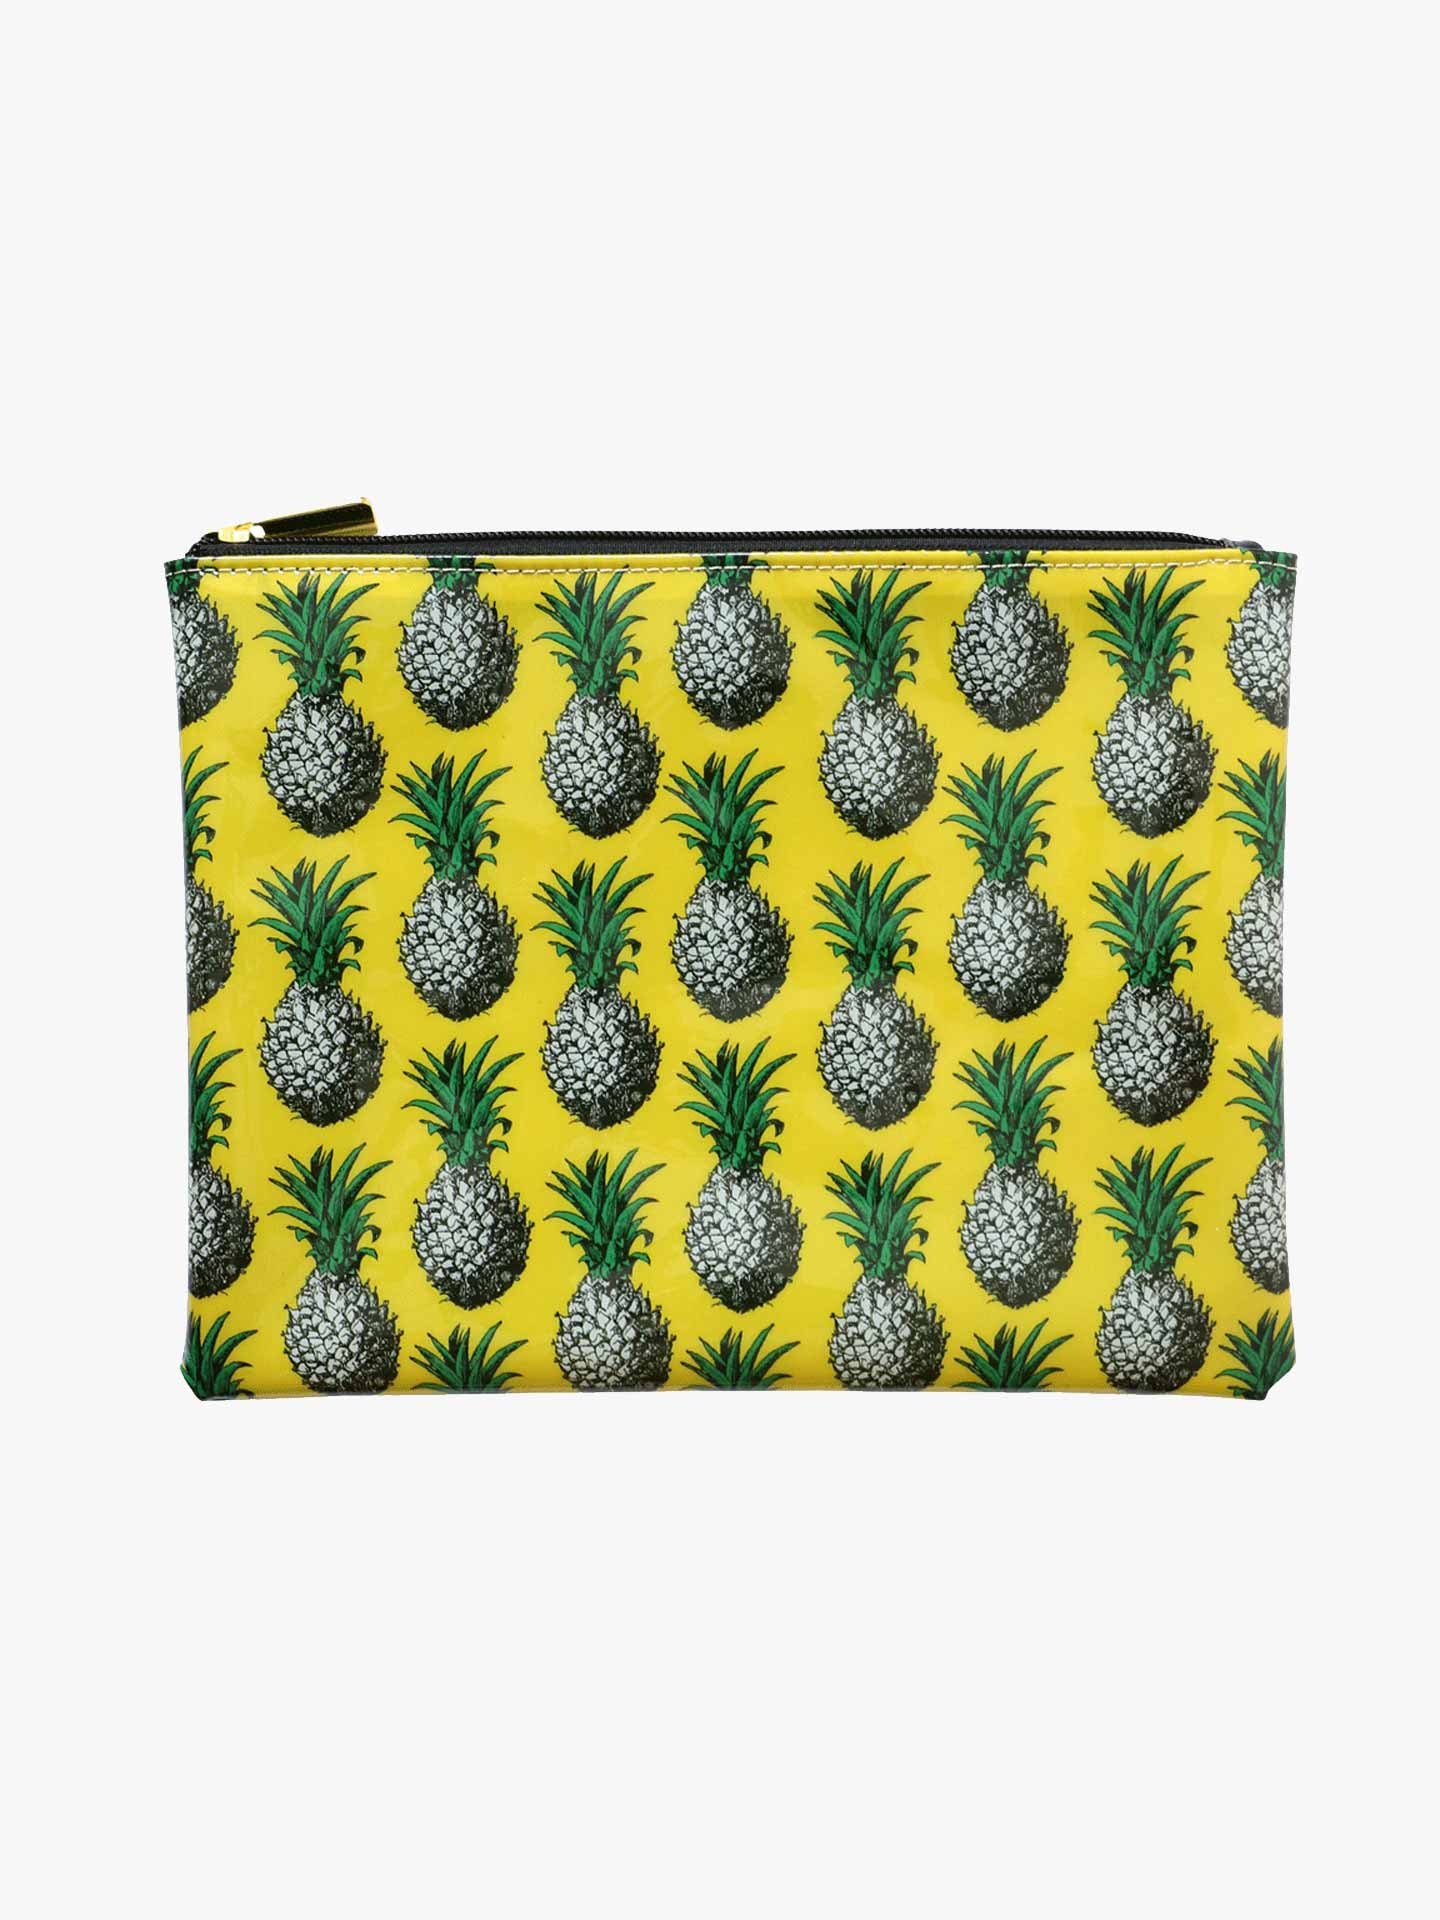 Multi Use Pouch - Tropical Pineapple